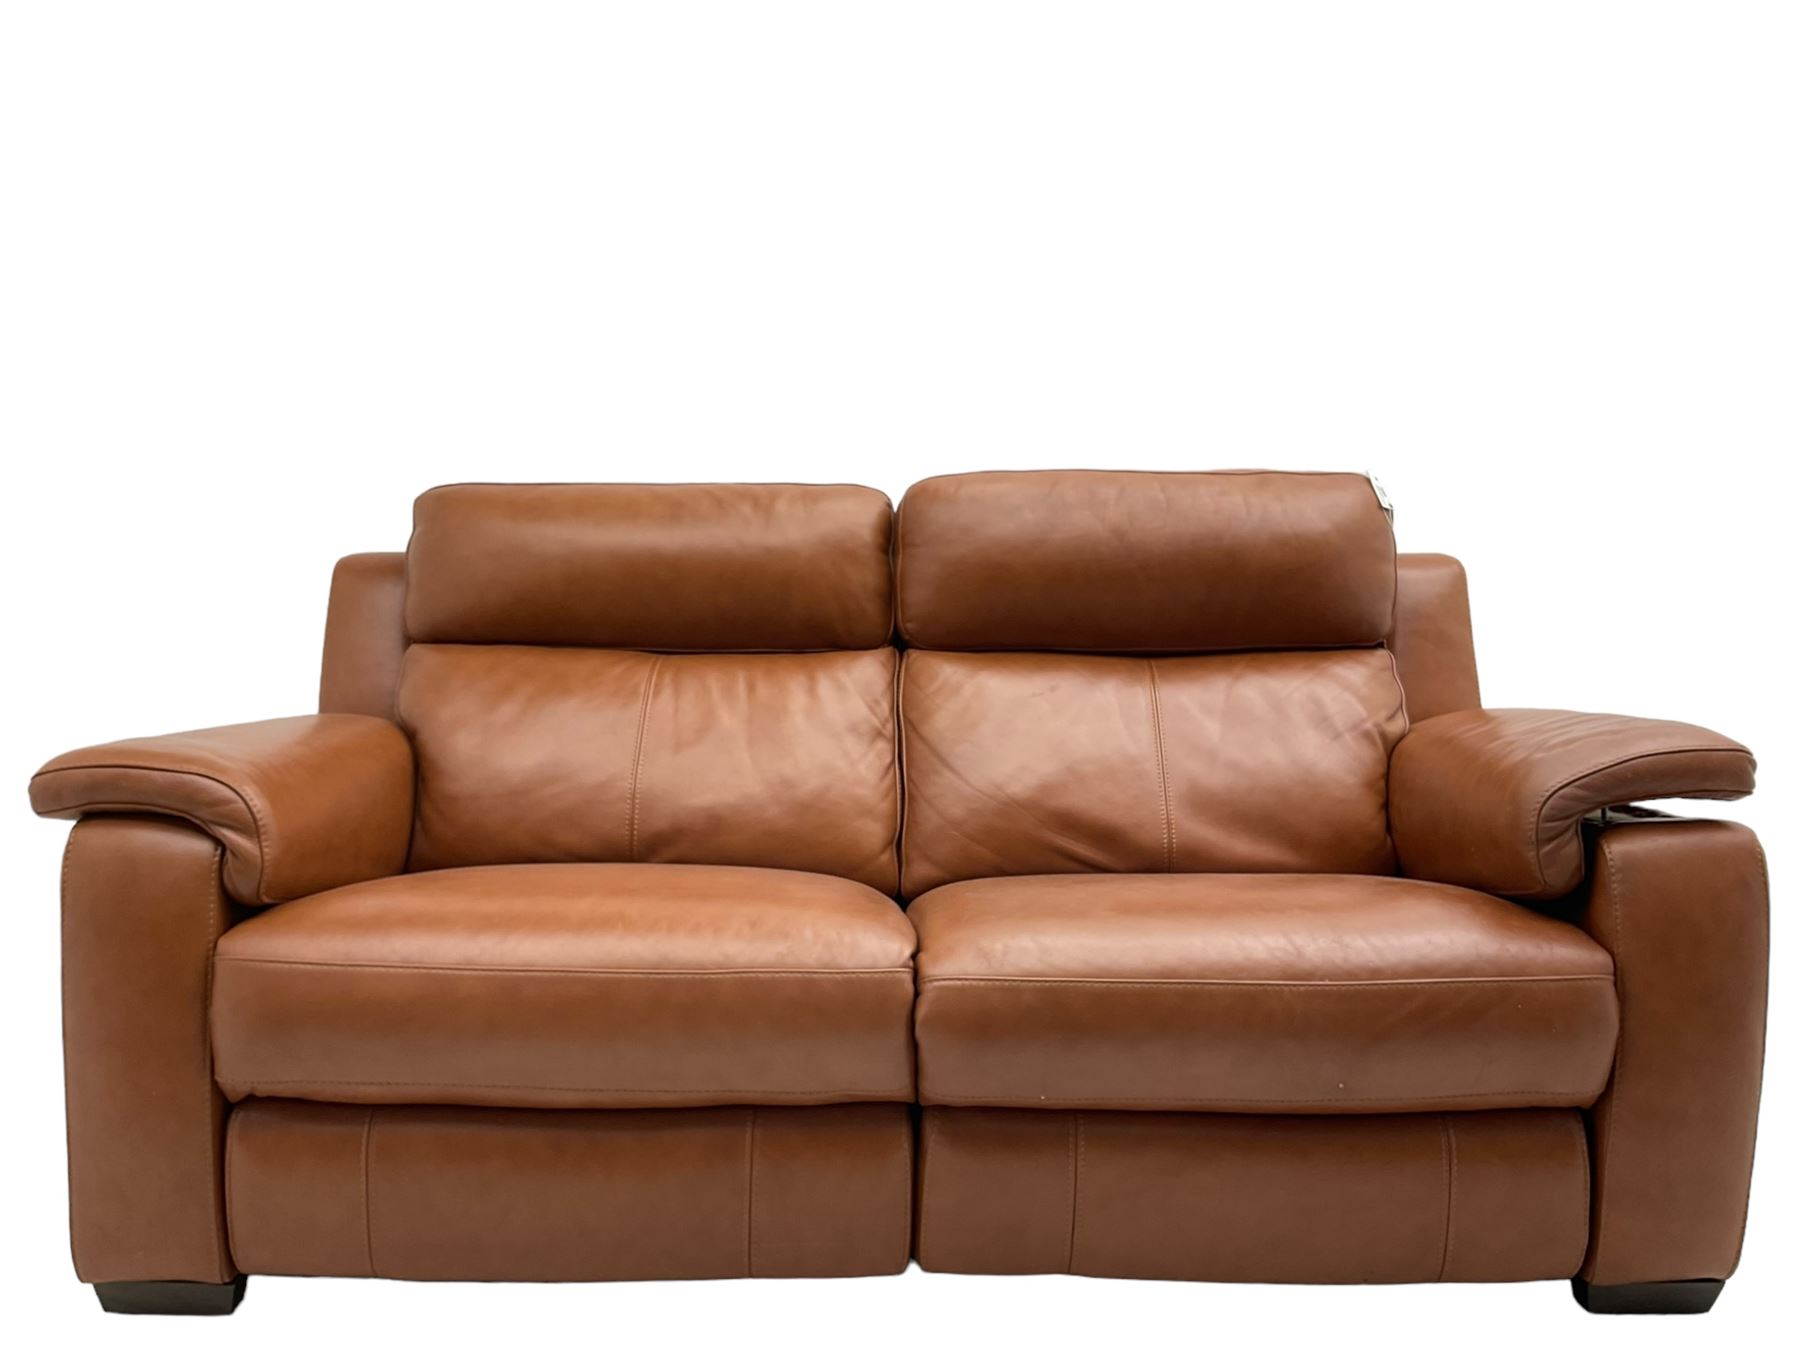 Two-seat electric reclining 'smart' sofa (W192cm - Image 2 of 8